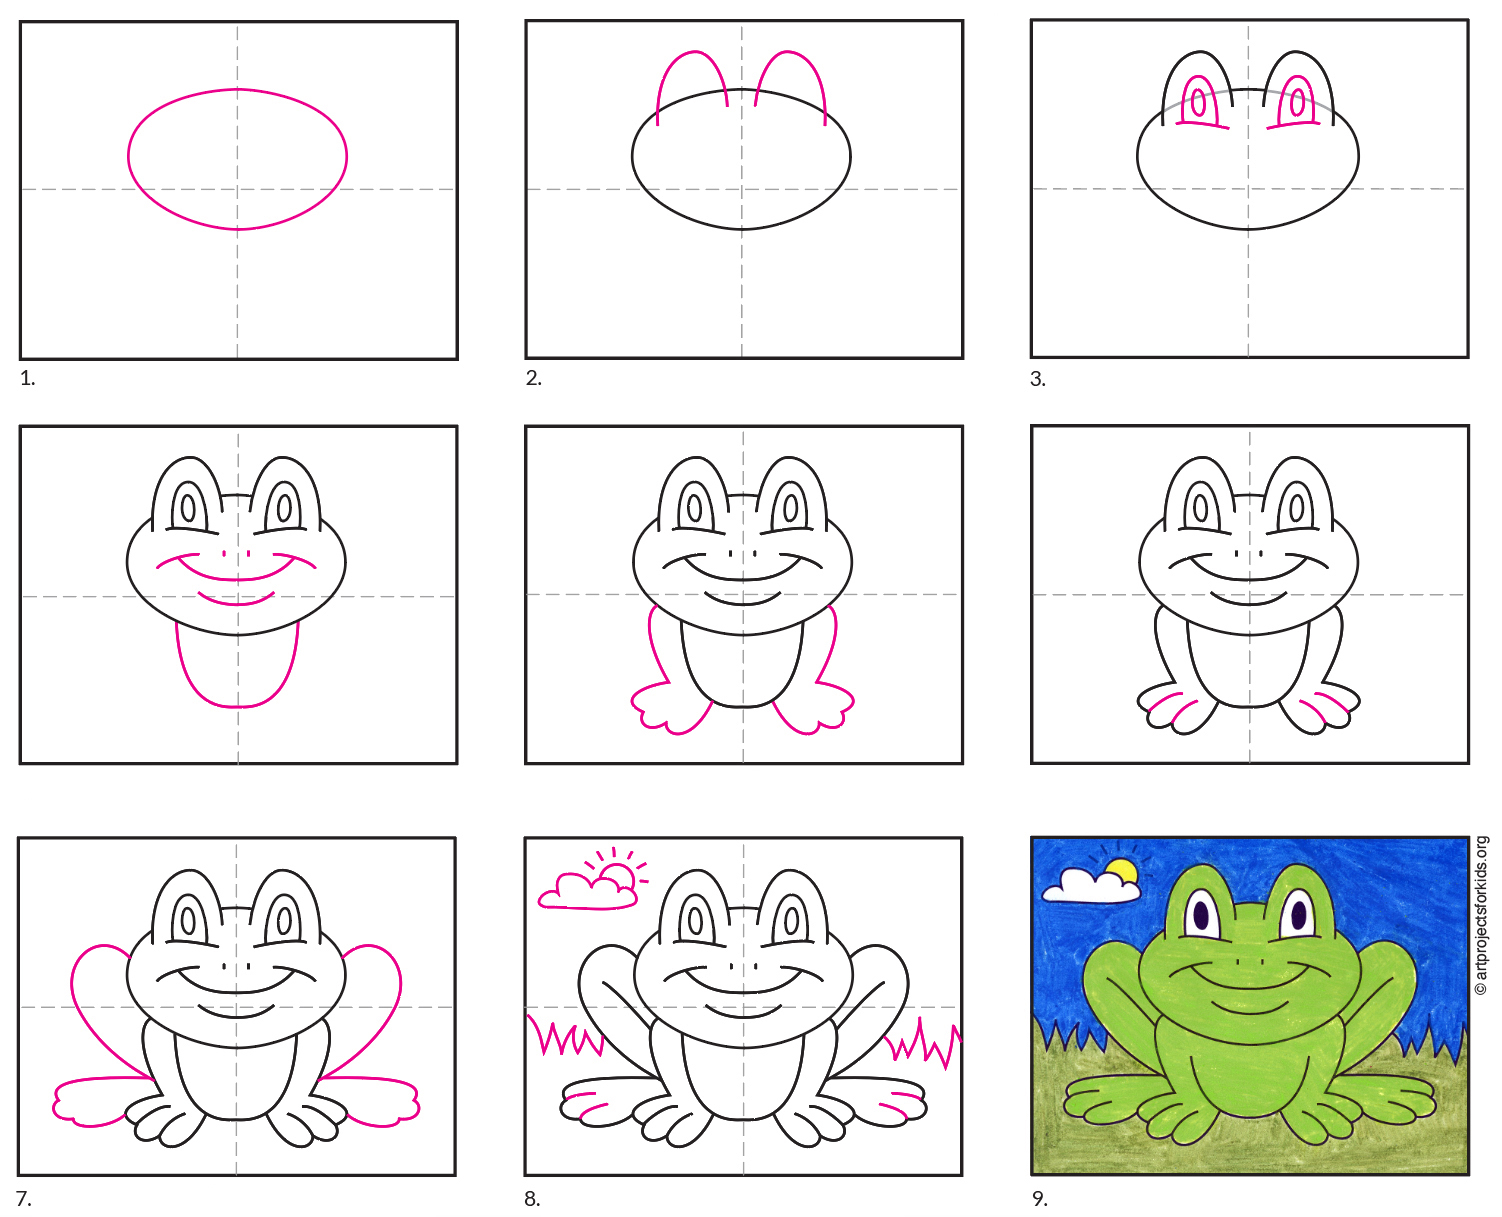 Top How To Draw A Simple Frog of the decade The ultimate guide 